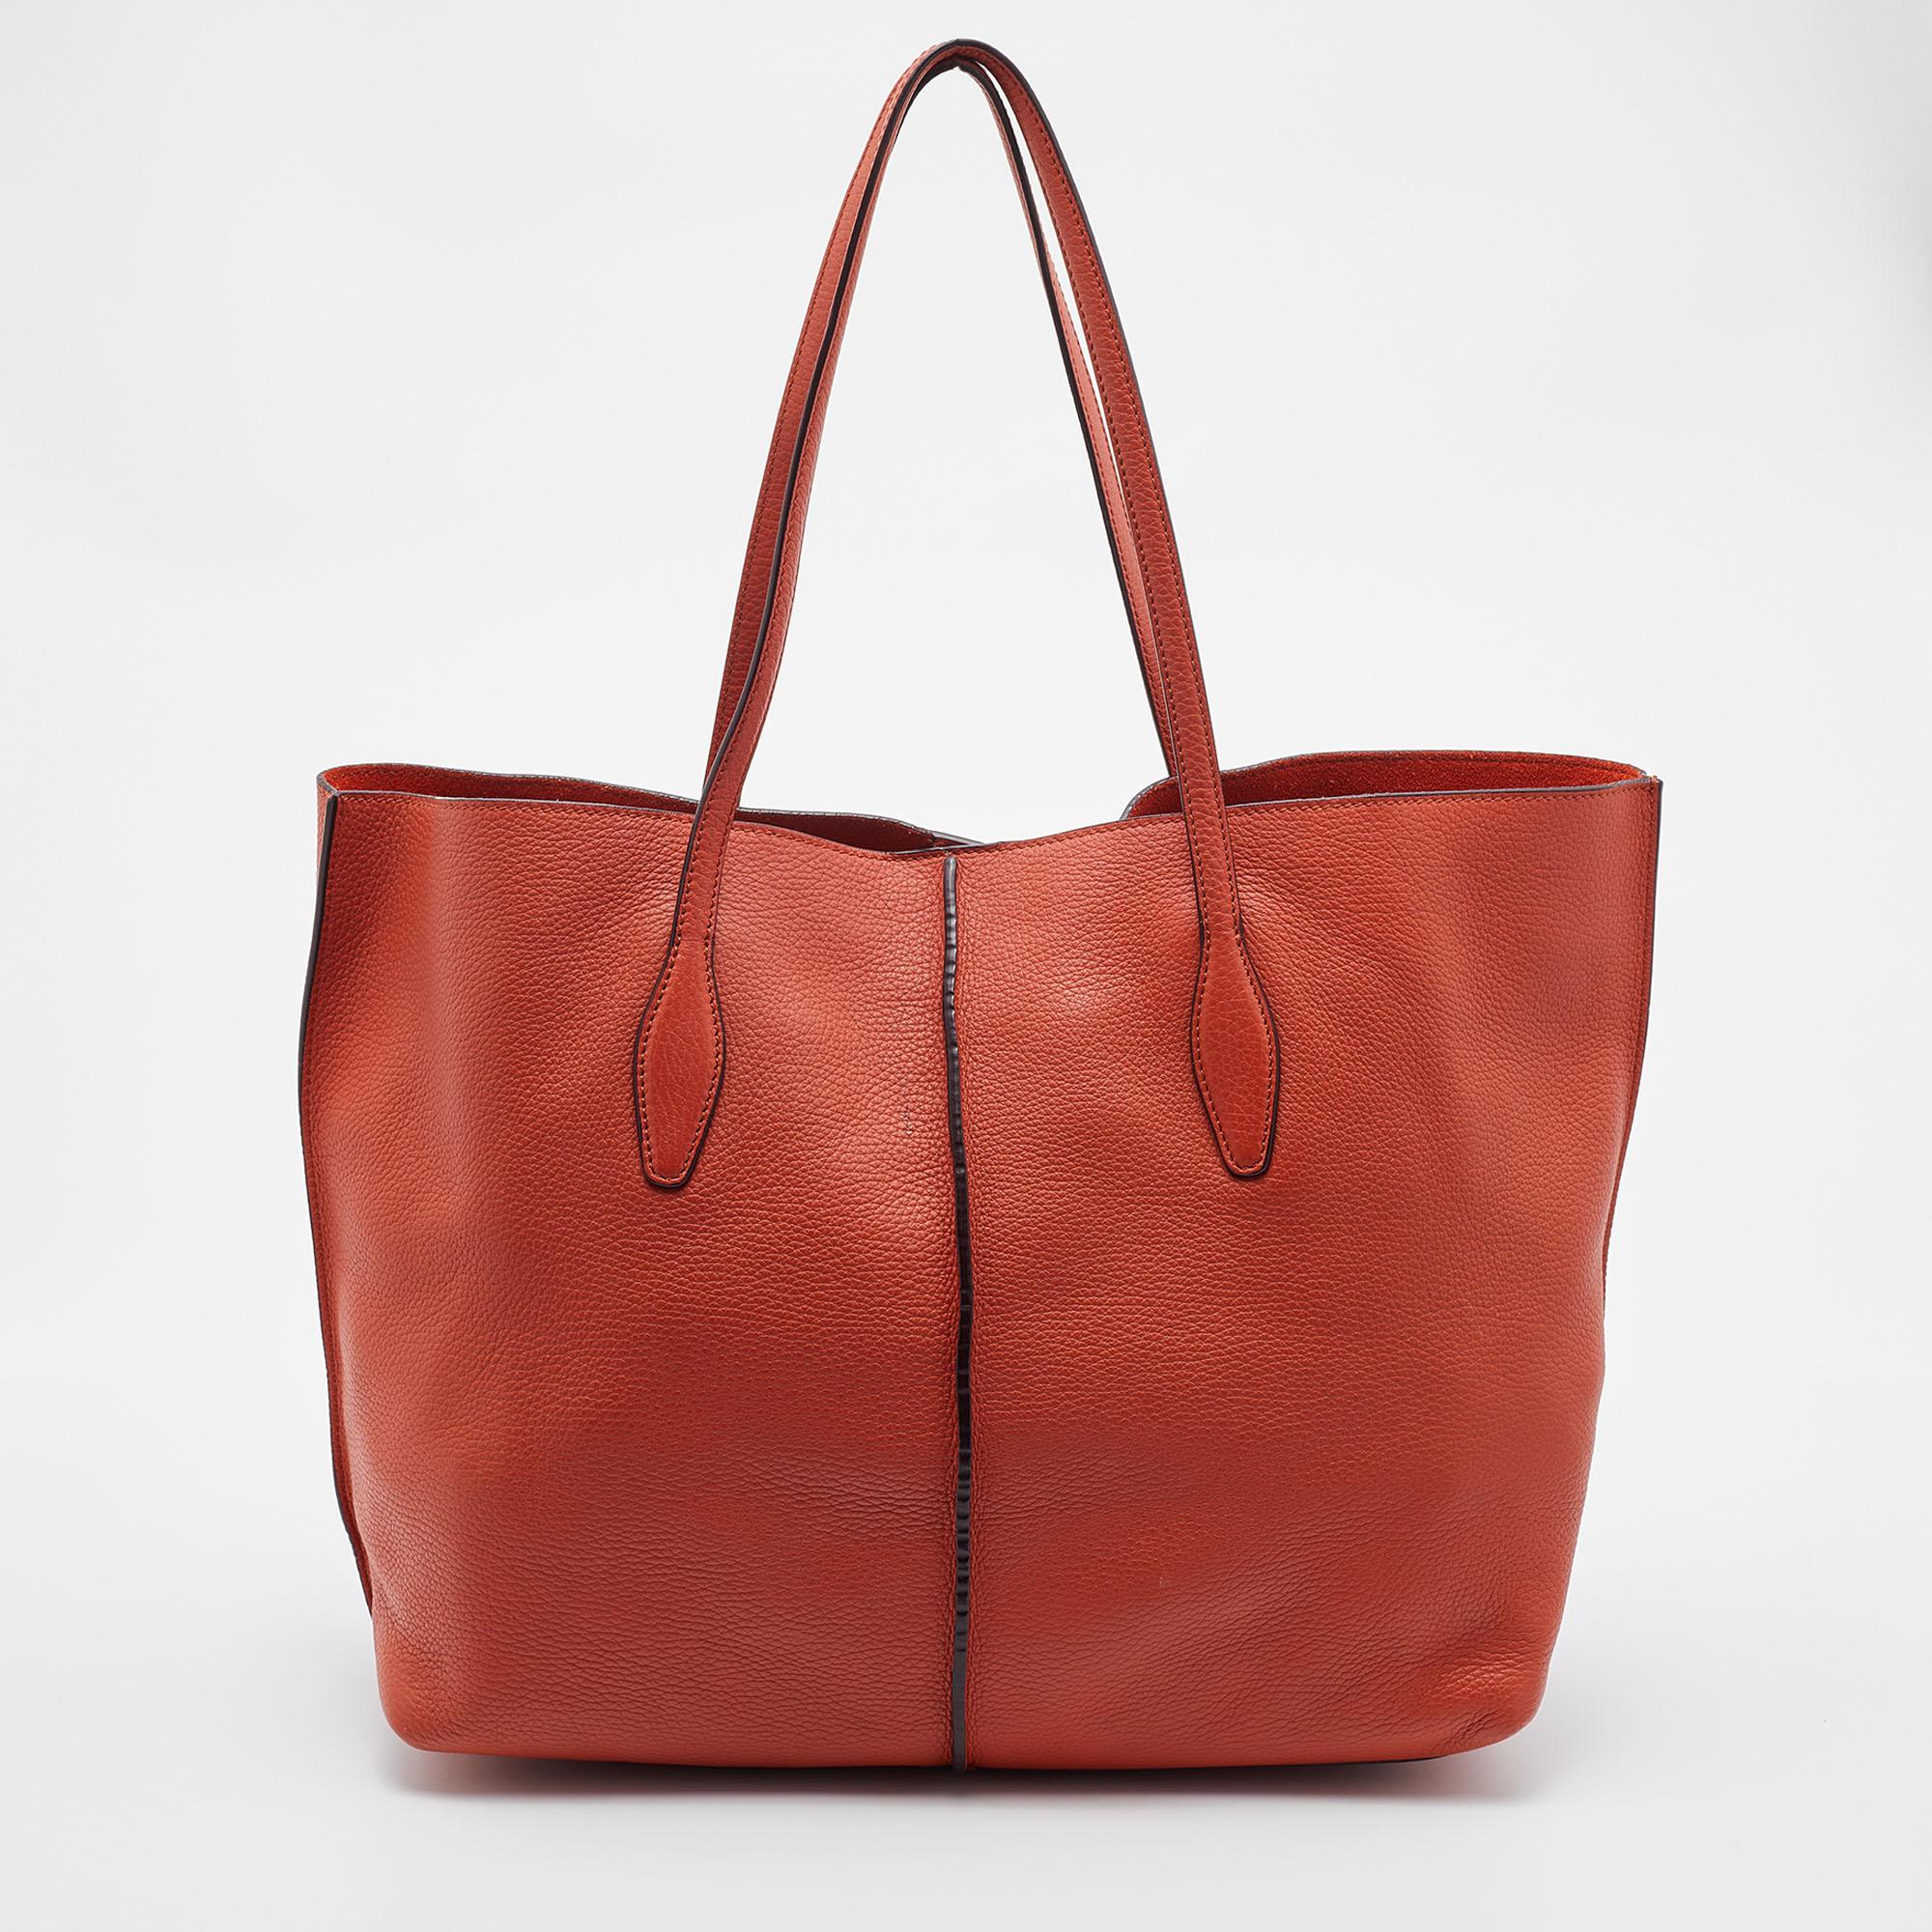 A creation that is both highly functional and appealing is this tote by Tod's. Crafted from leather, this tote is held by dual handles and equipped with a spacious interior to hold your essentials with ease.

